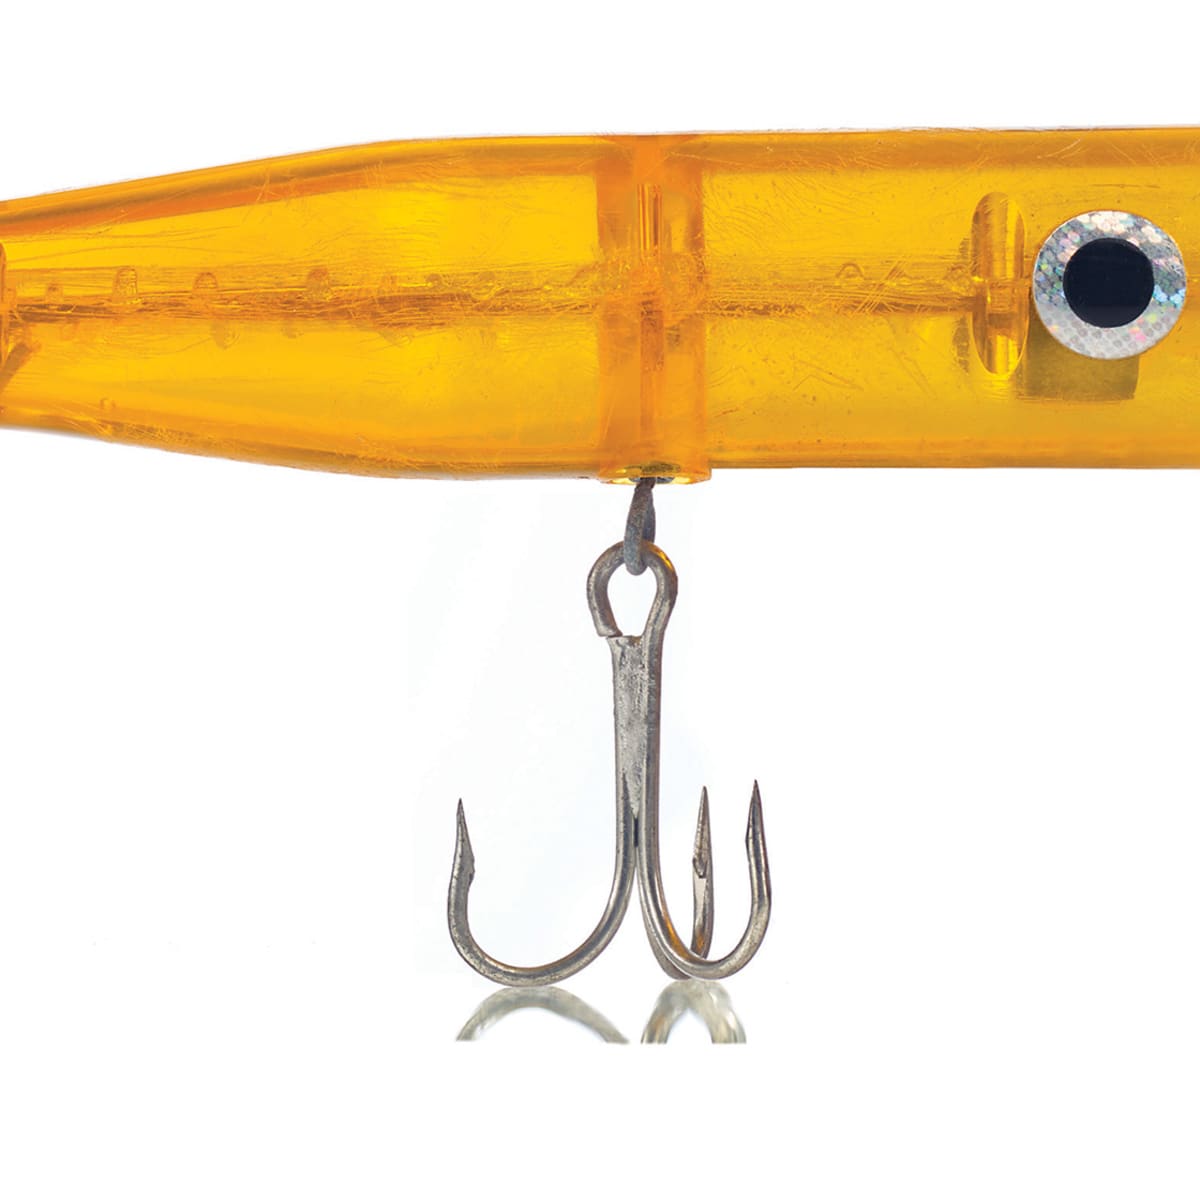 New Lures Made For Forward-Facing Sonor - Texas Fish & Game Magazine